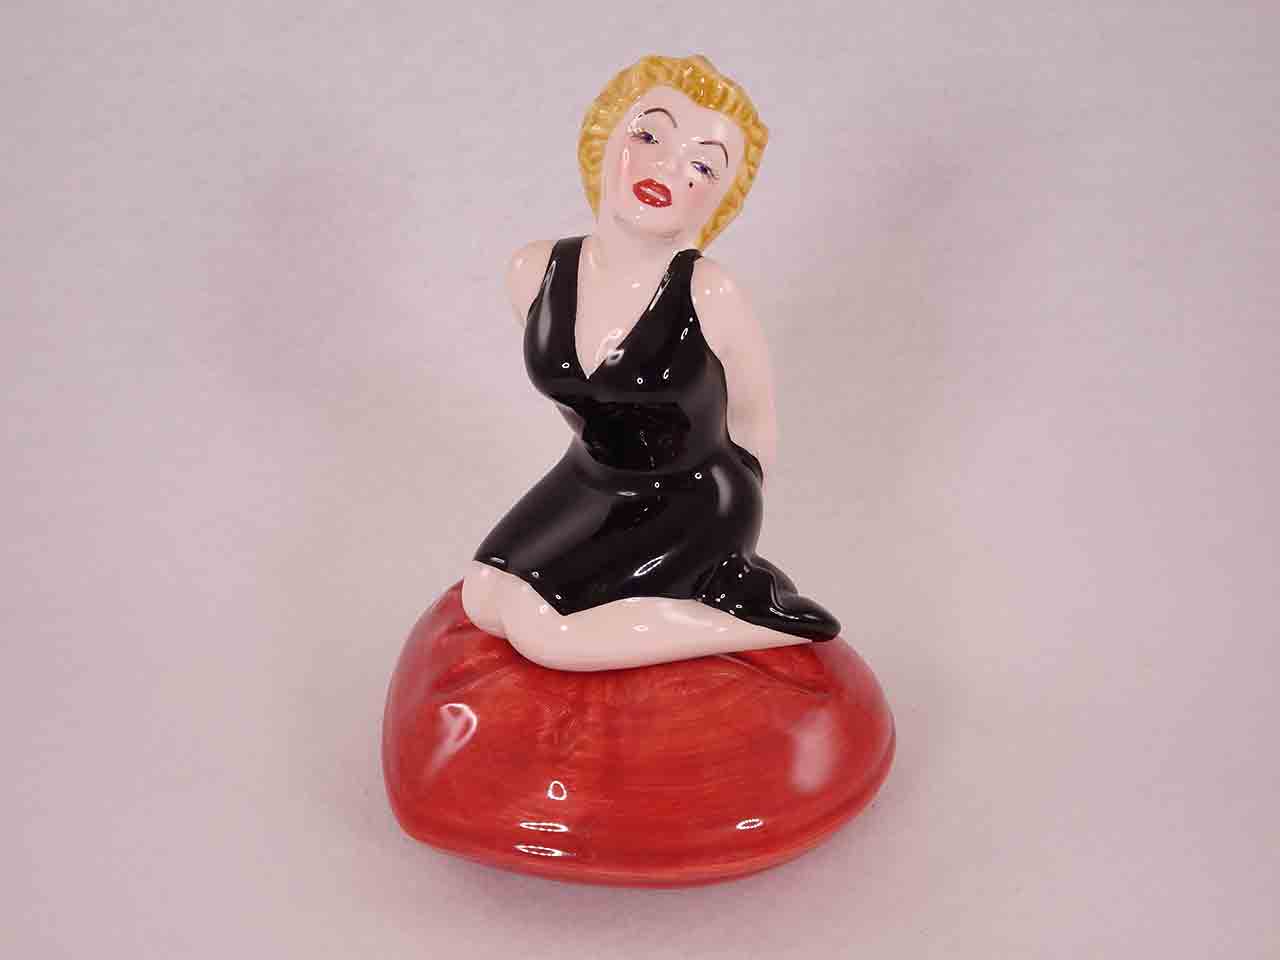 Marilyn Monroe salt and pepper shakers by Clay Art